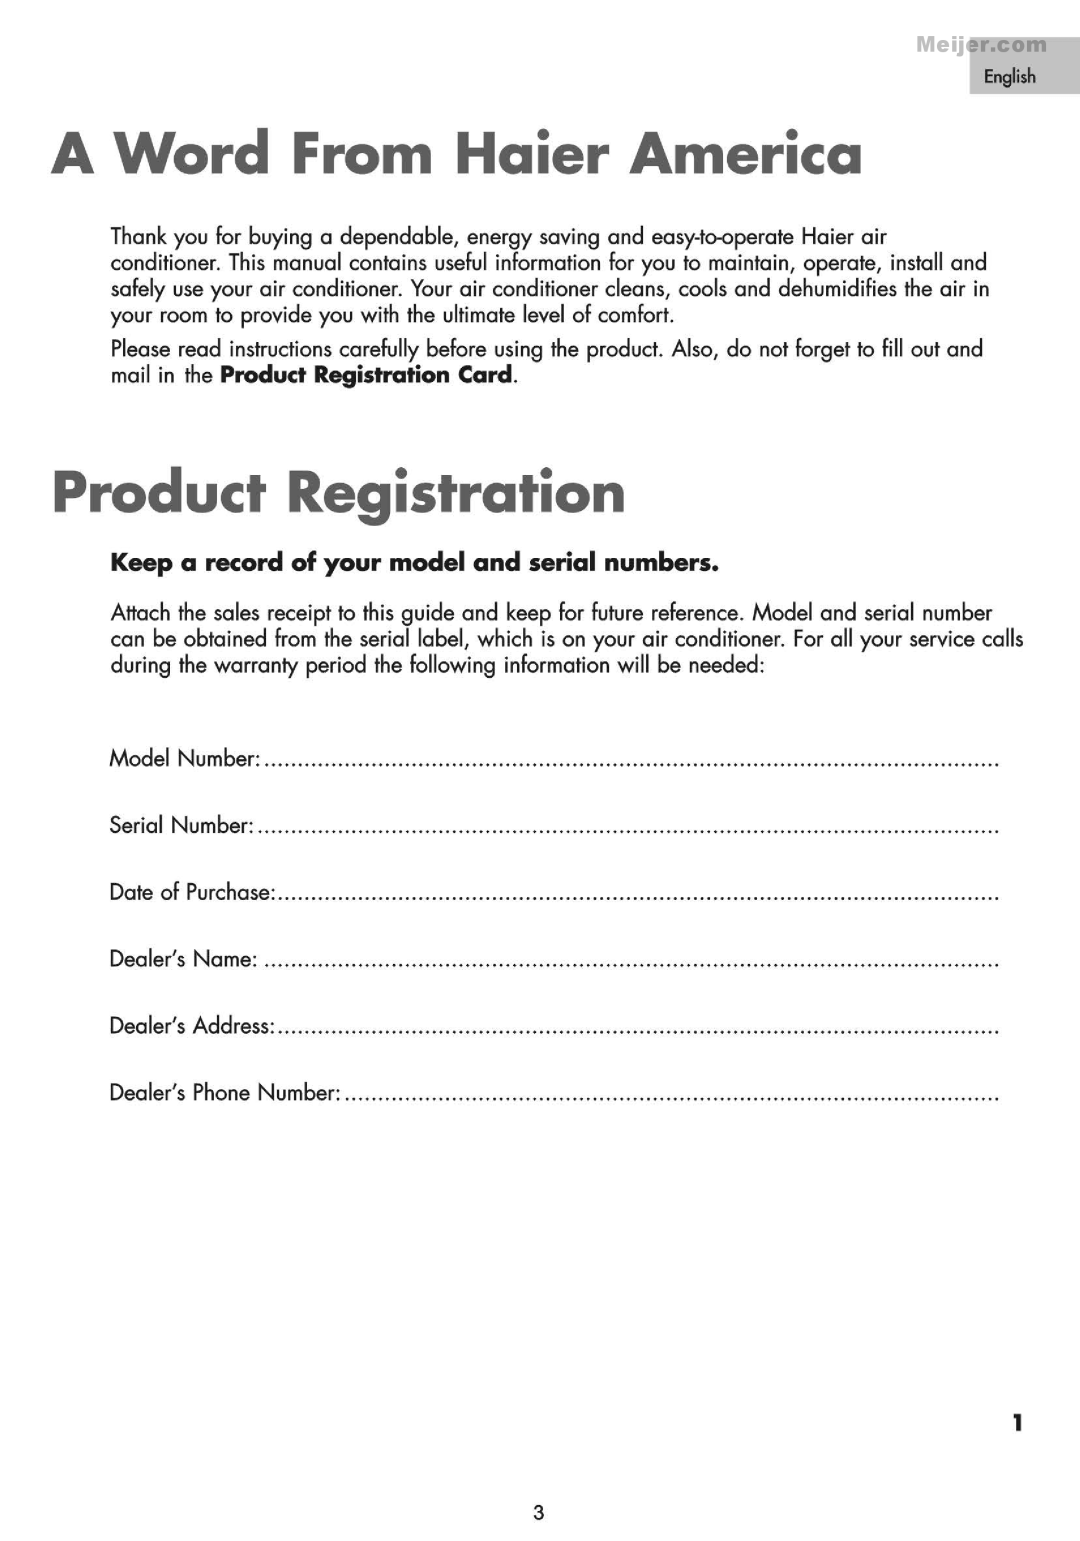 Haier HPDLOXCM user manual A Word From Haier America, Product Registration, Keep a record of your model and serial numbers 